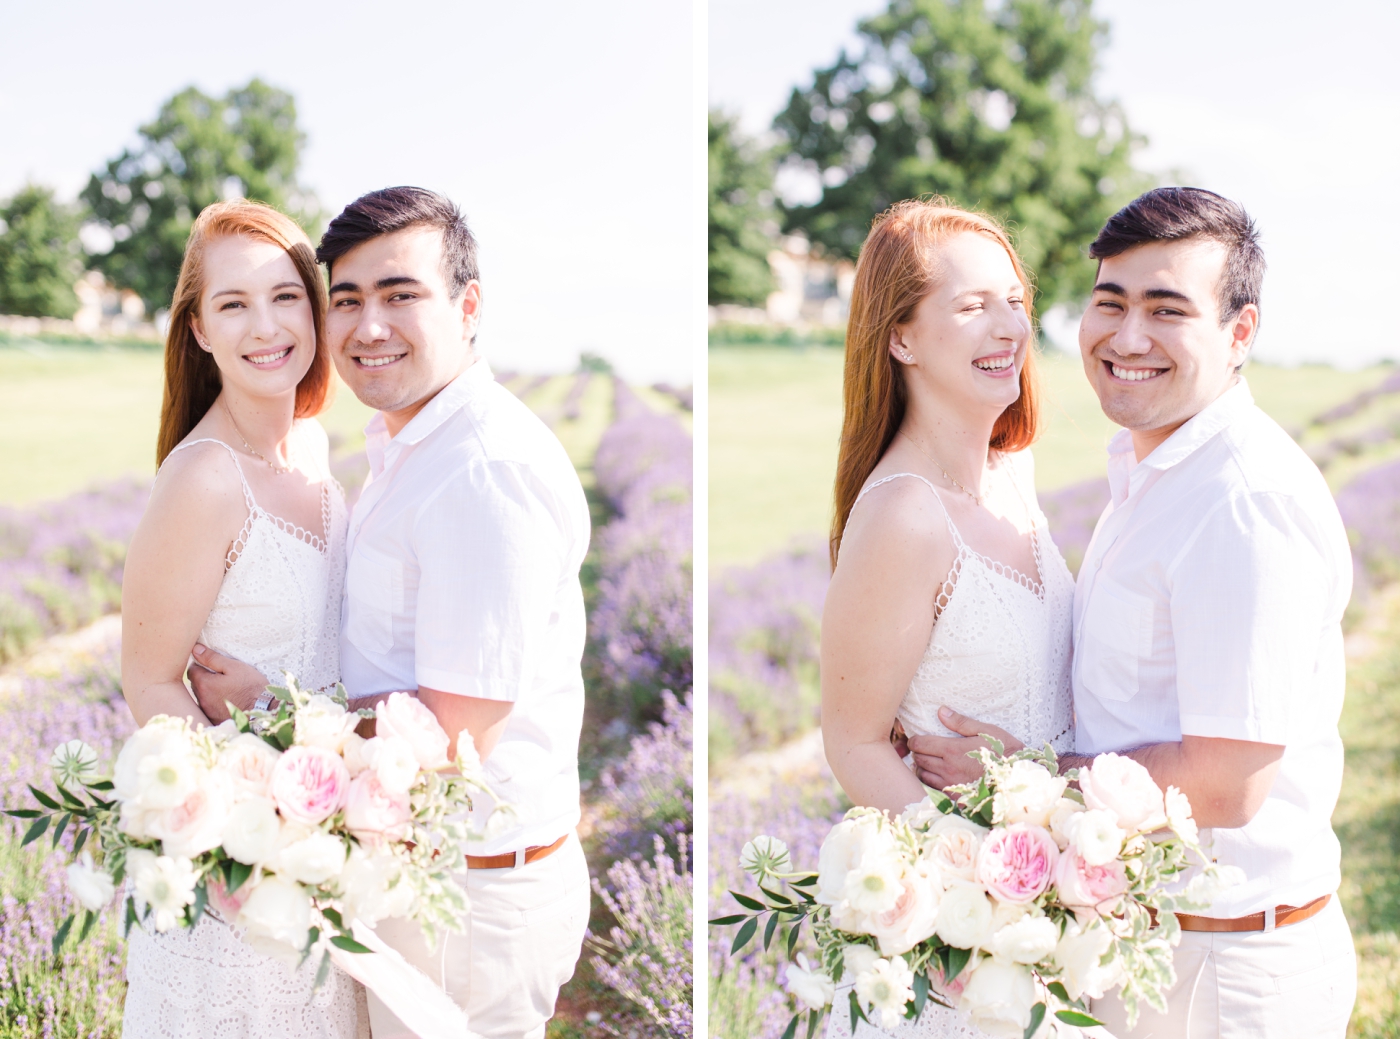 Summer engagement sessions in a lavender field